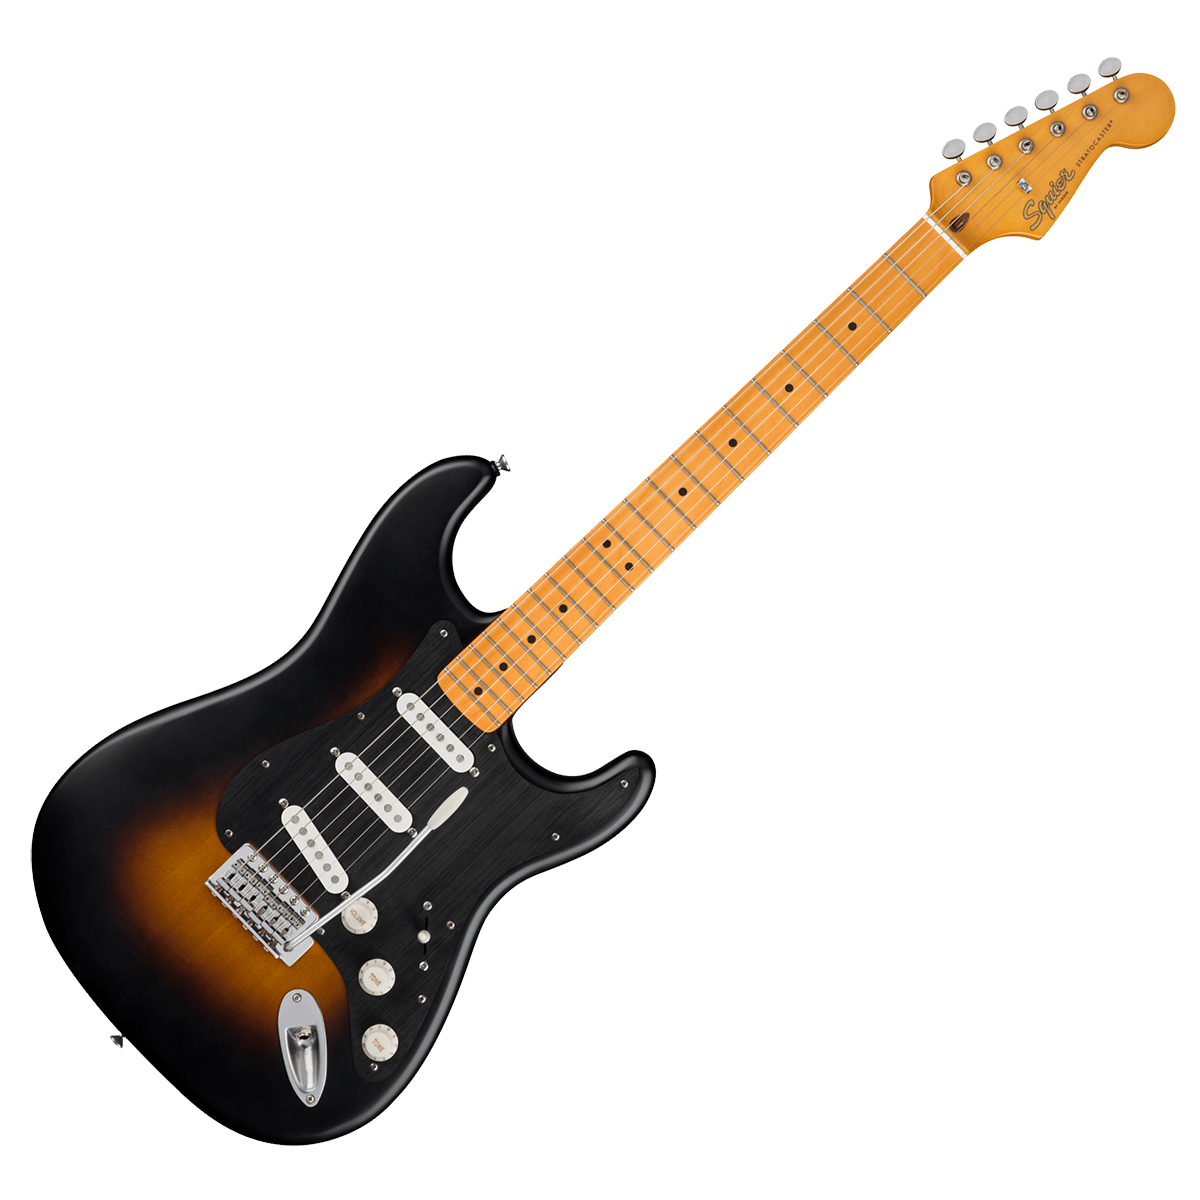 Squier by Fender 40th Anniversary Stratocaster Vintage Edition Satin Wide  2TS エレキギター初心者14点セット【マーシャルアンプ付き】 ストラトキャスター スクワイヤー / スクワイア 【数量限定】 |  島村楽器オンラインストア